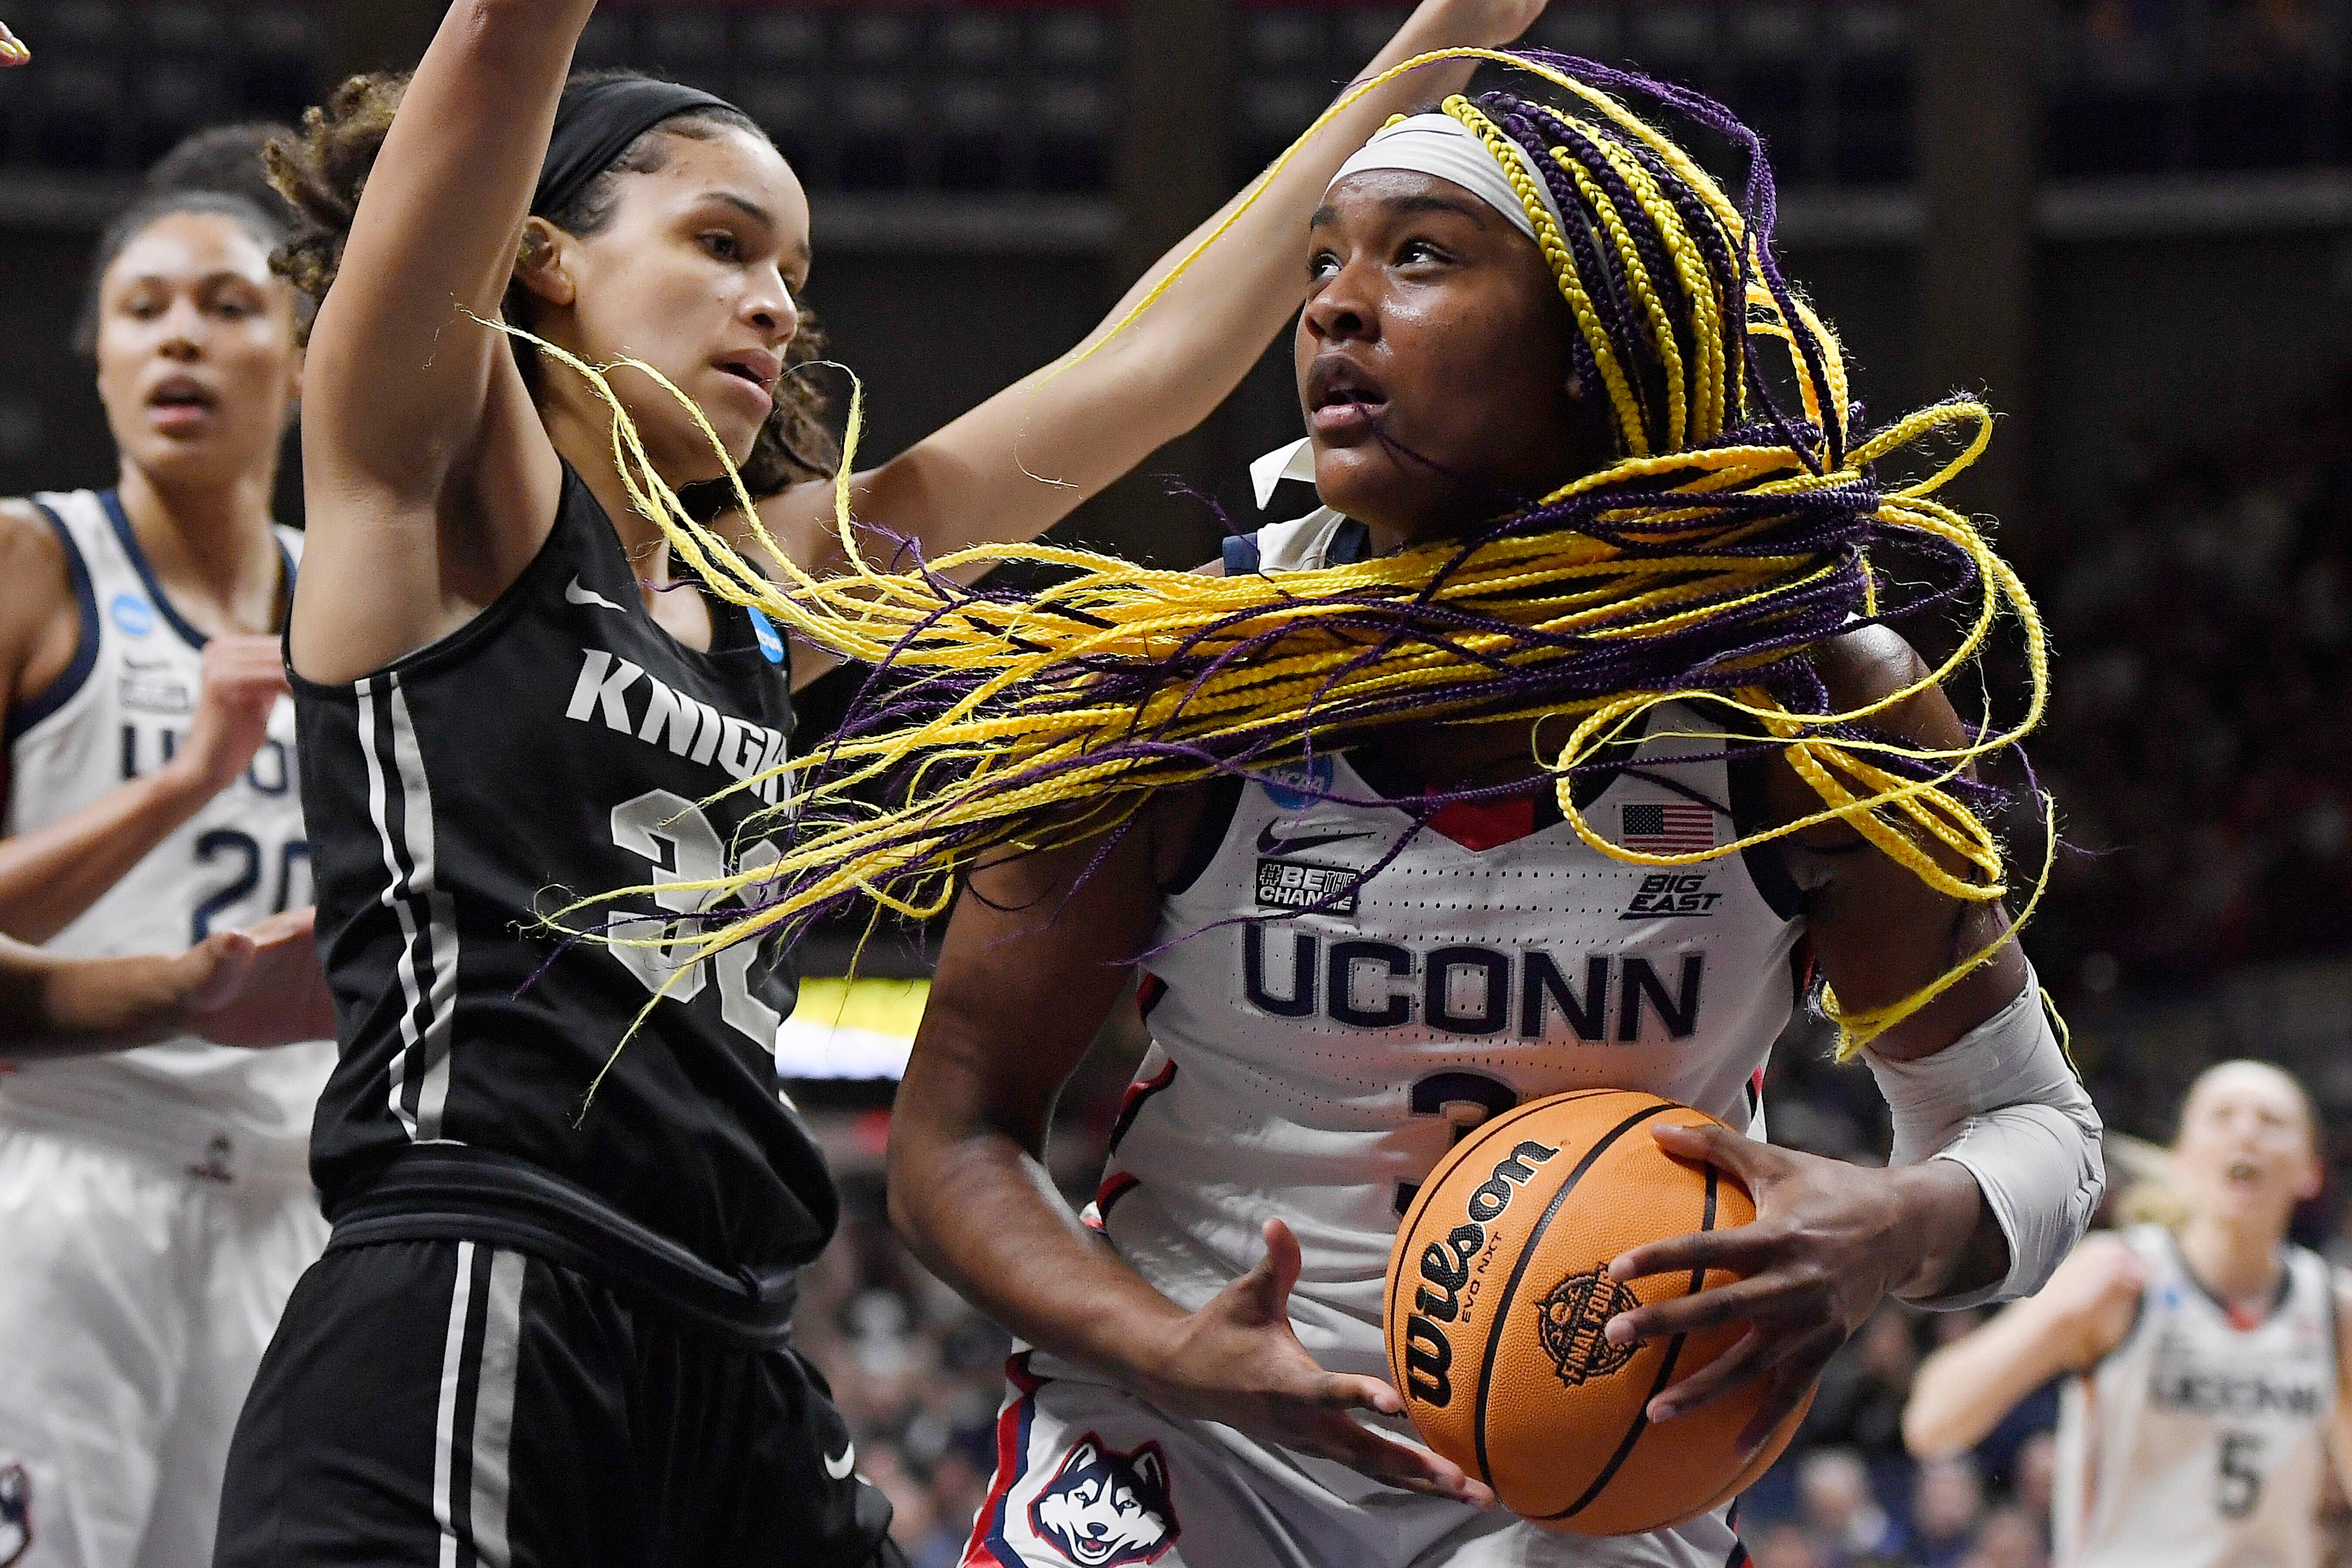 The UConn women’s basketball team took smaller, less-expensive planes than the men’s team in the 2018-19 and 2019-20 seasons. Connecticut's Aaliyah Edwards is guarded by Central Florida's Brittney Smith.